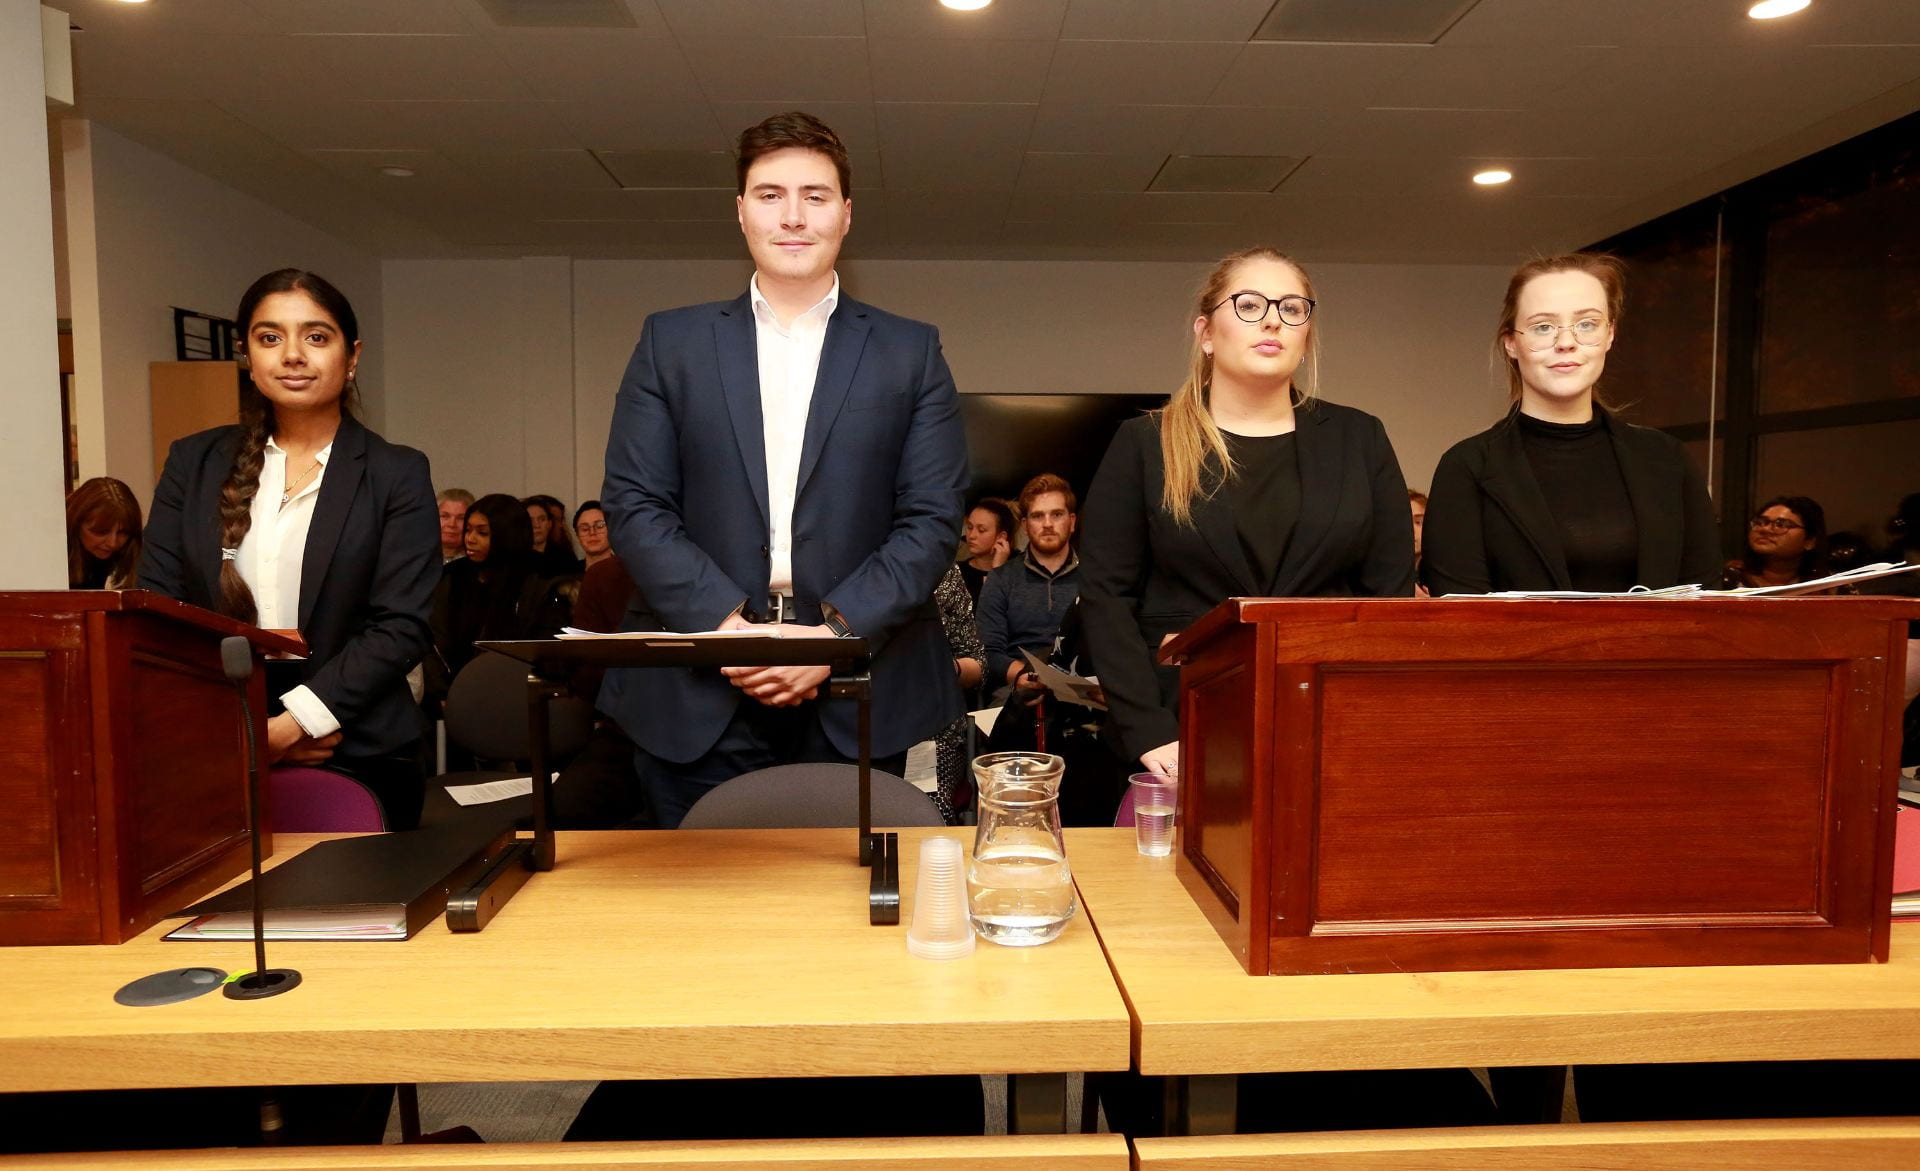 Students from Sussex and Brighton go head-to-head at the annual mooting competition.